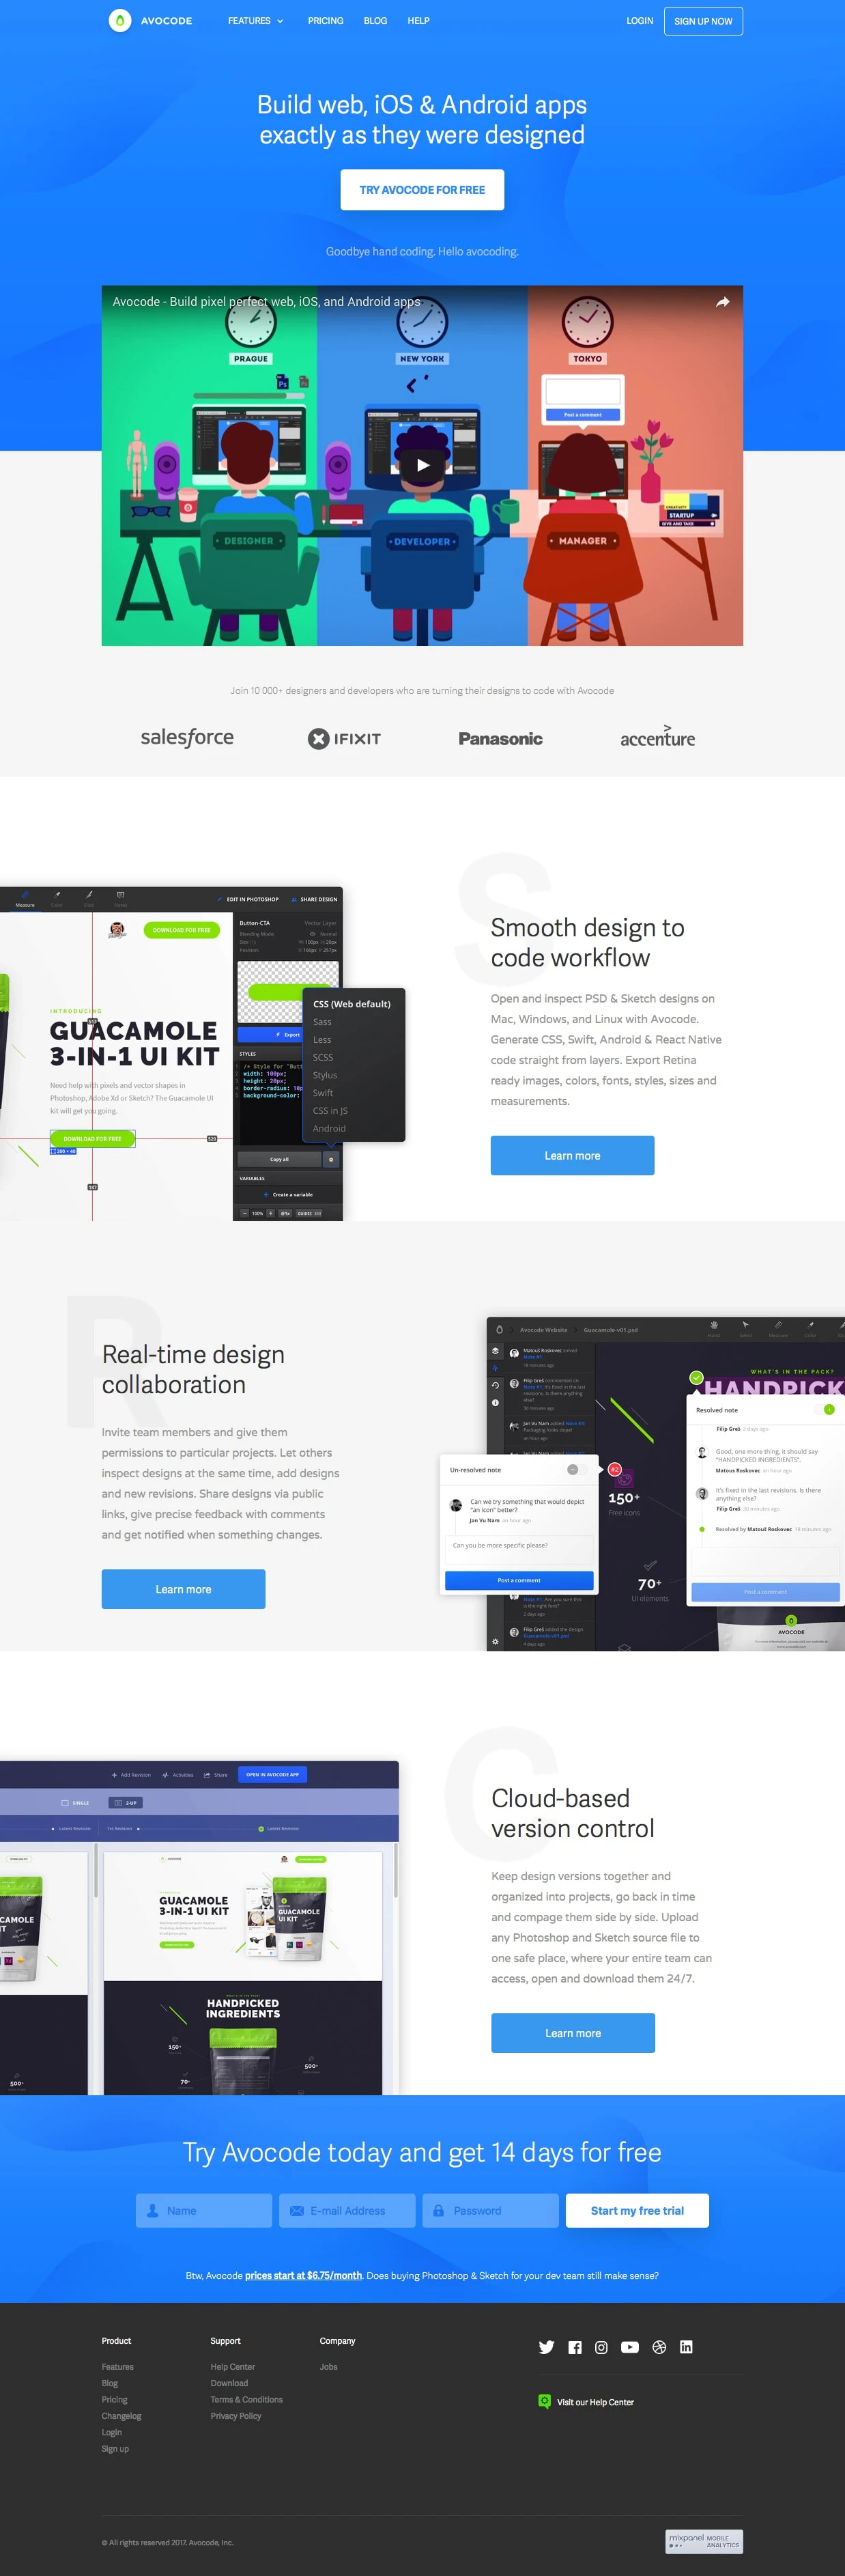 Avocode Landing Page Example: Build web, iOS & Android apps exactly as they were designed